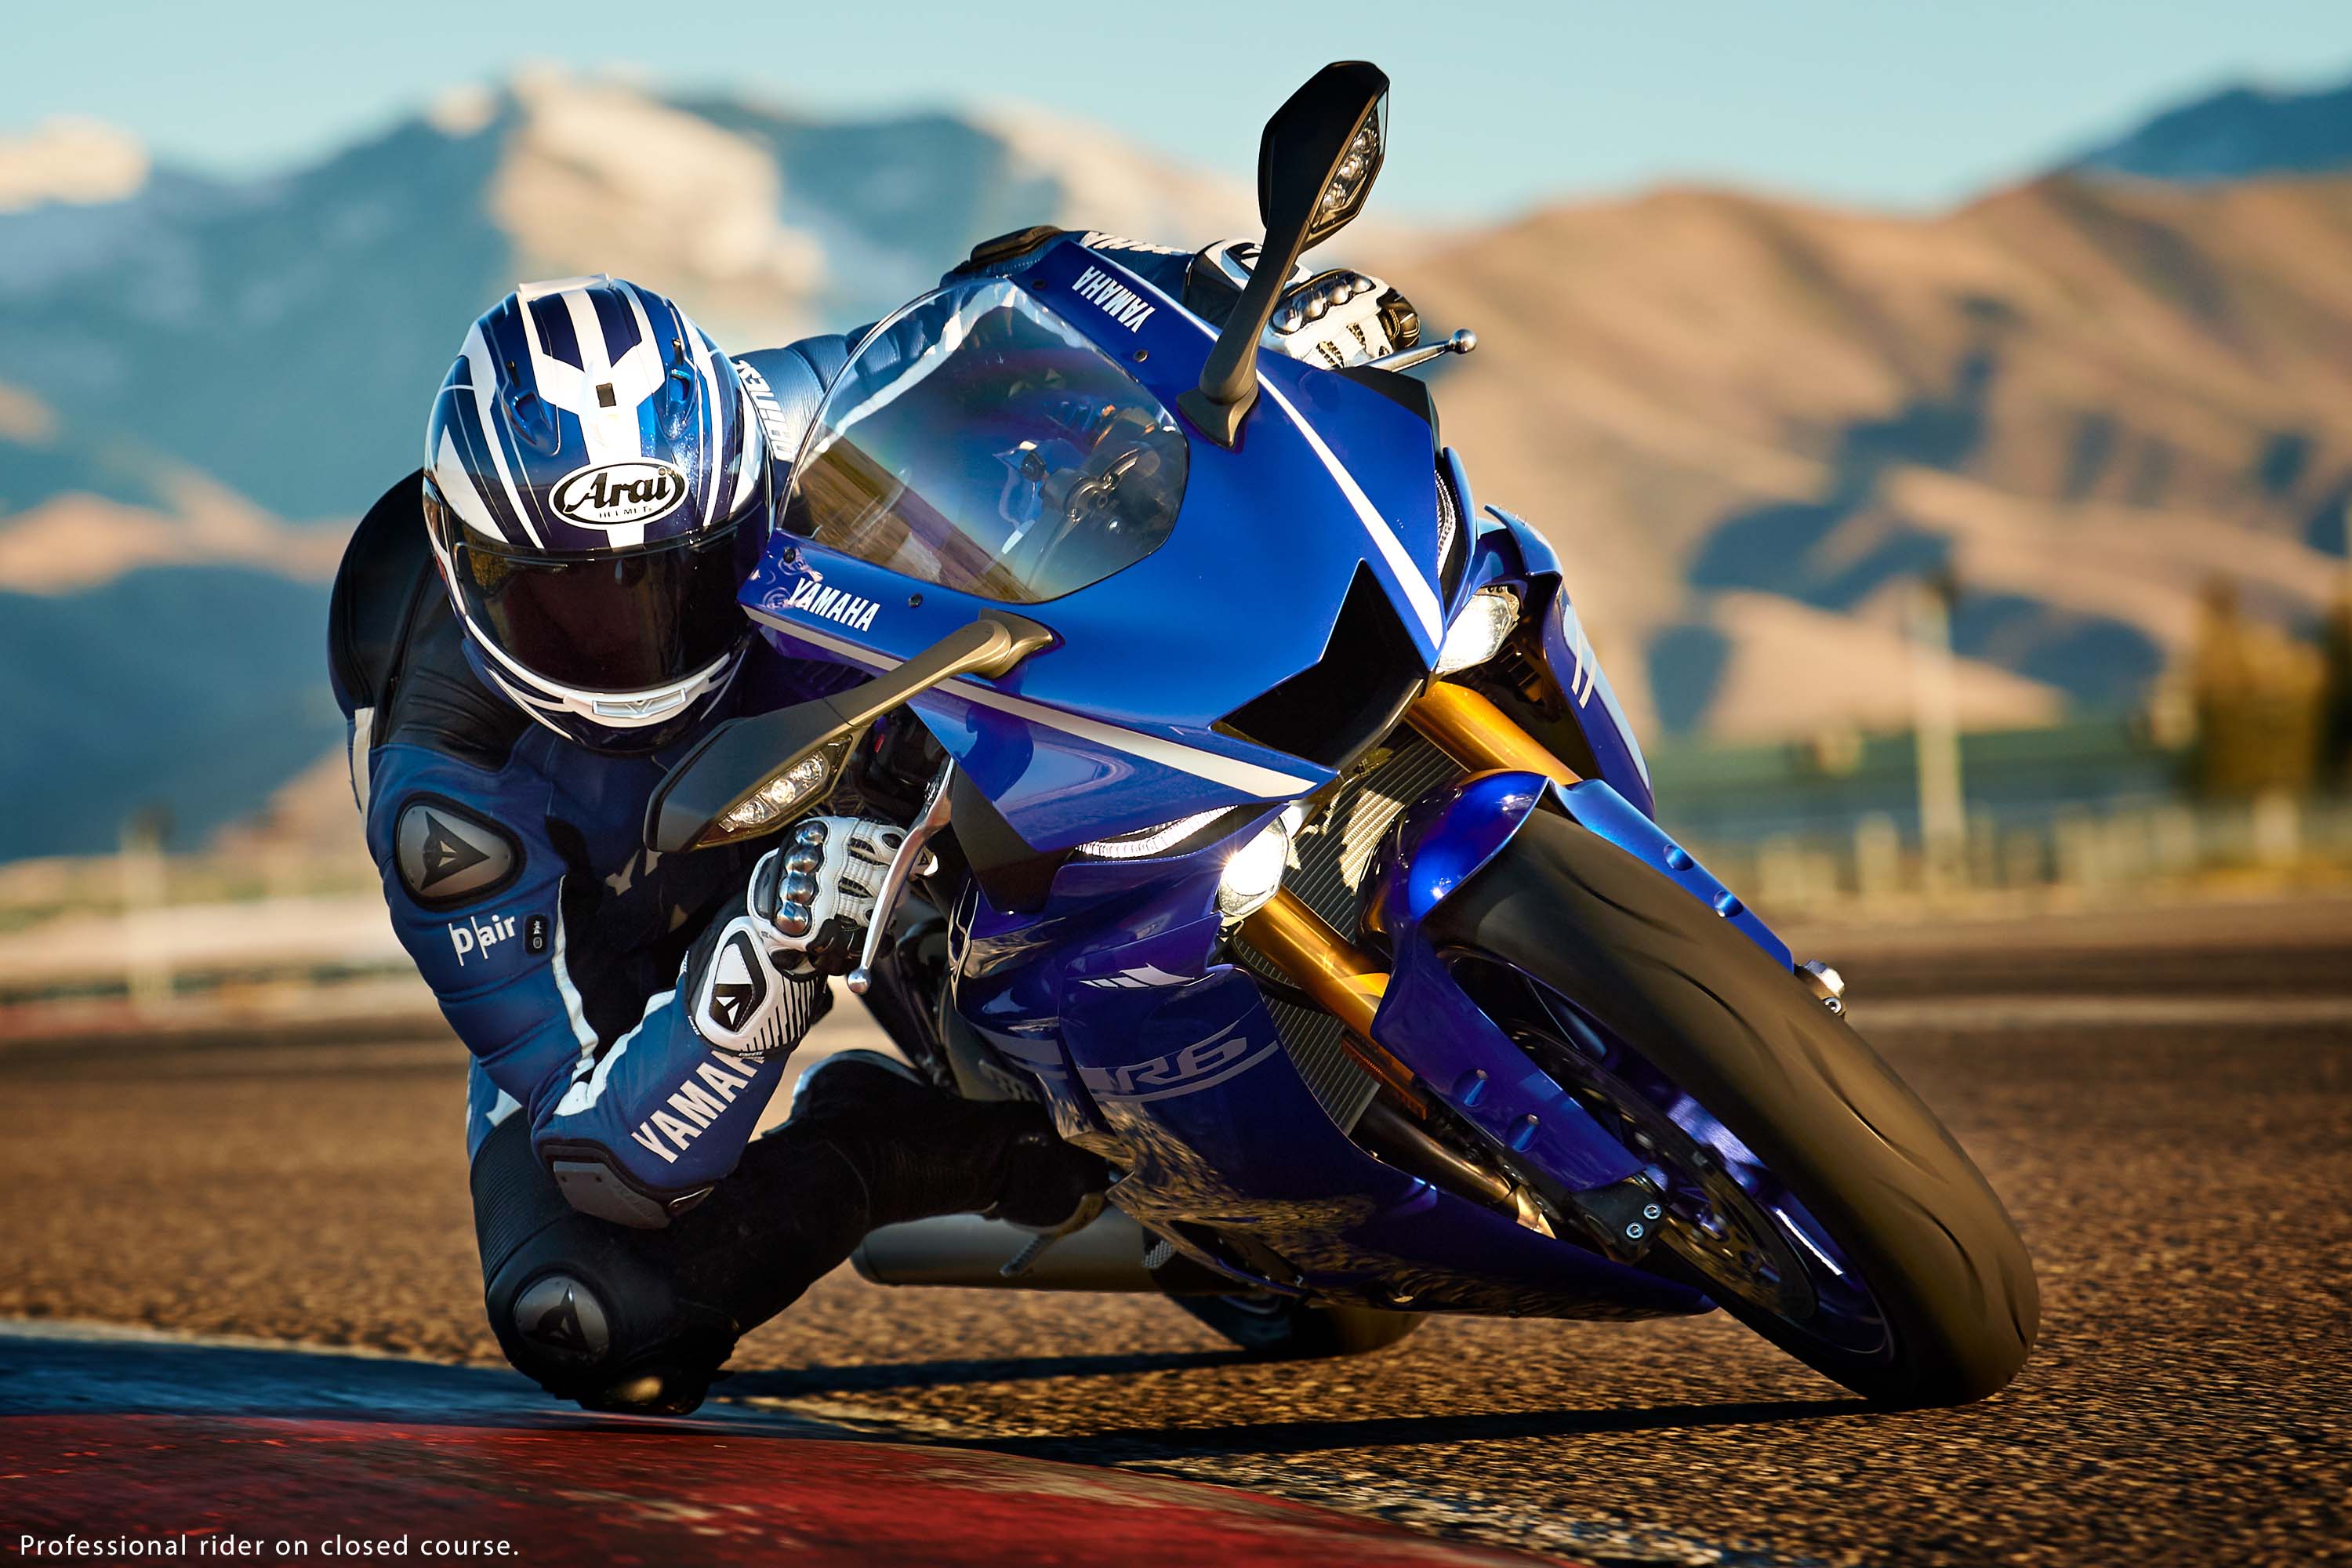 More Photos of the 2017 Yamaha YZF-R6